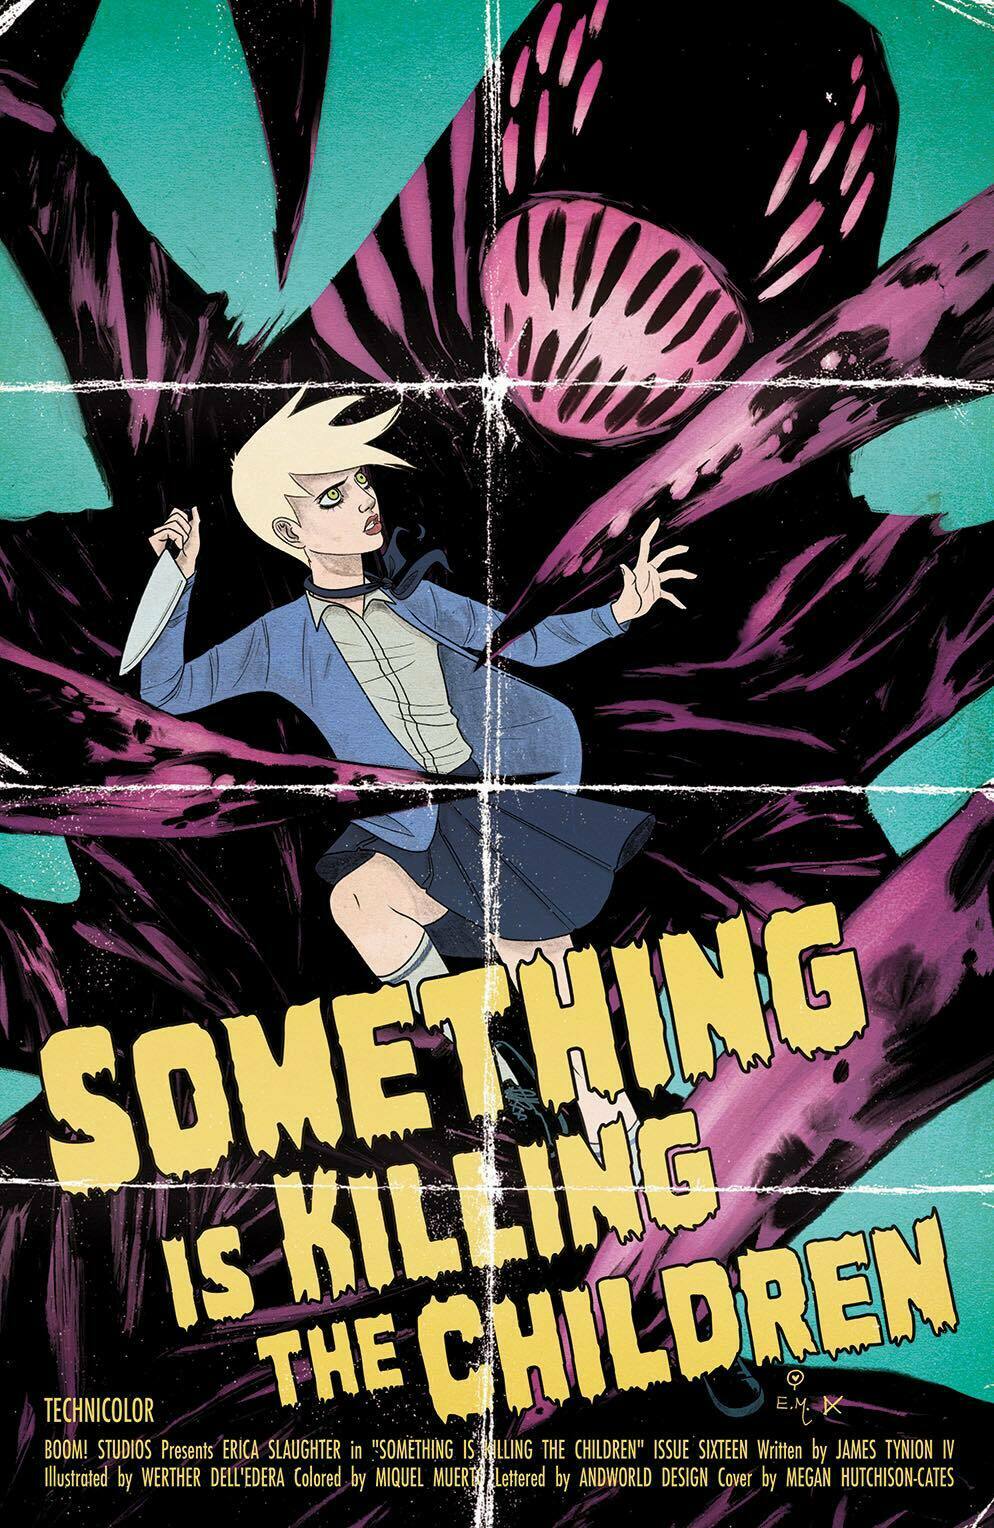 SOMETHING IS KILLING THE CHILDREN #16 by Megan Hutchinson-Cates - LIMITED VARIANT